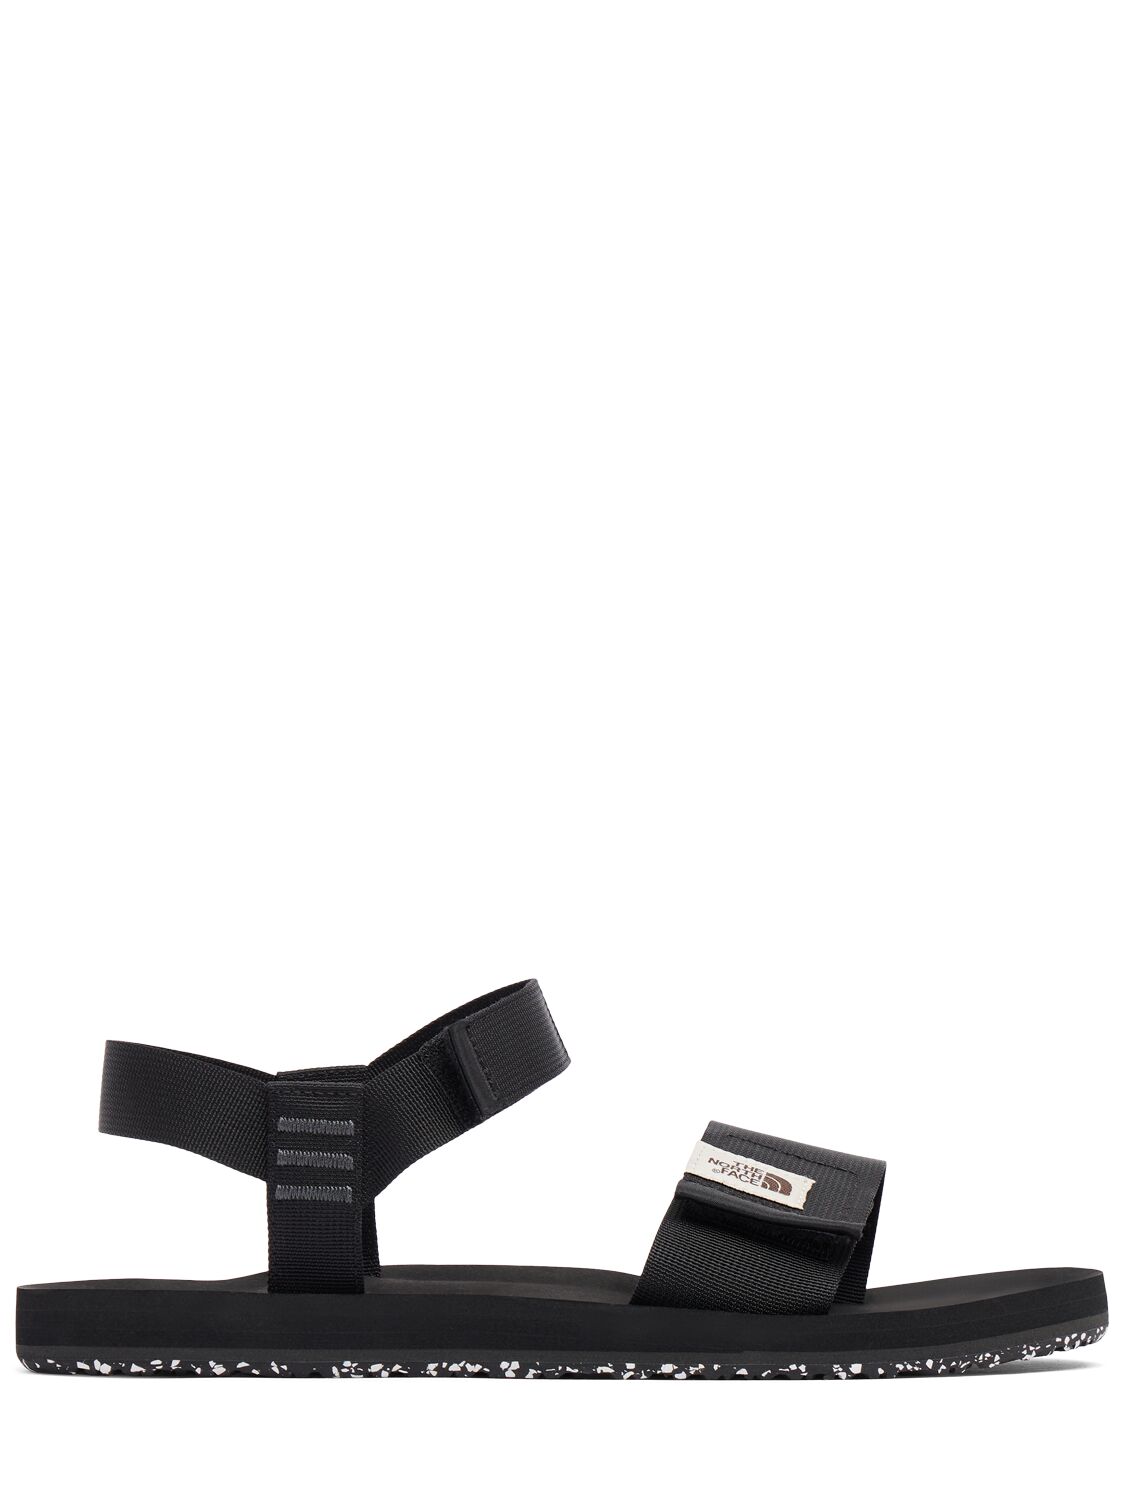 Image of Never Stop Sandals